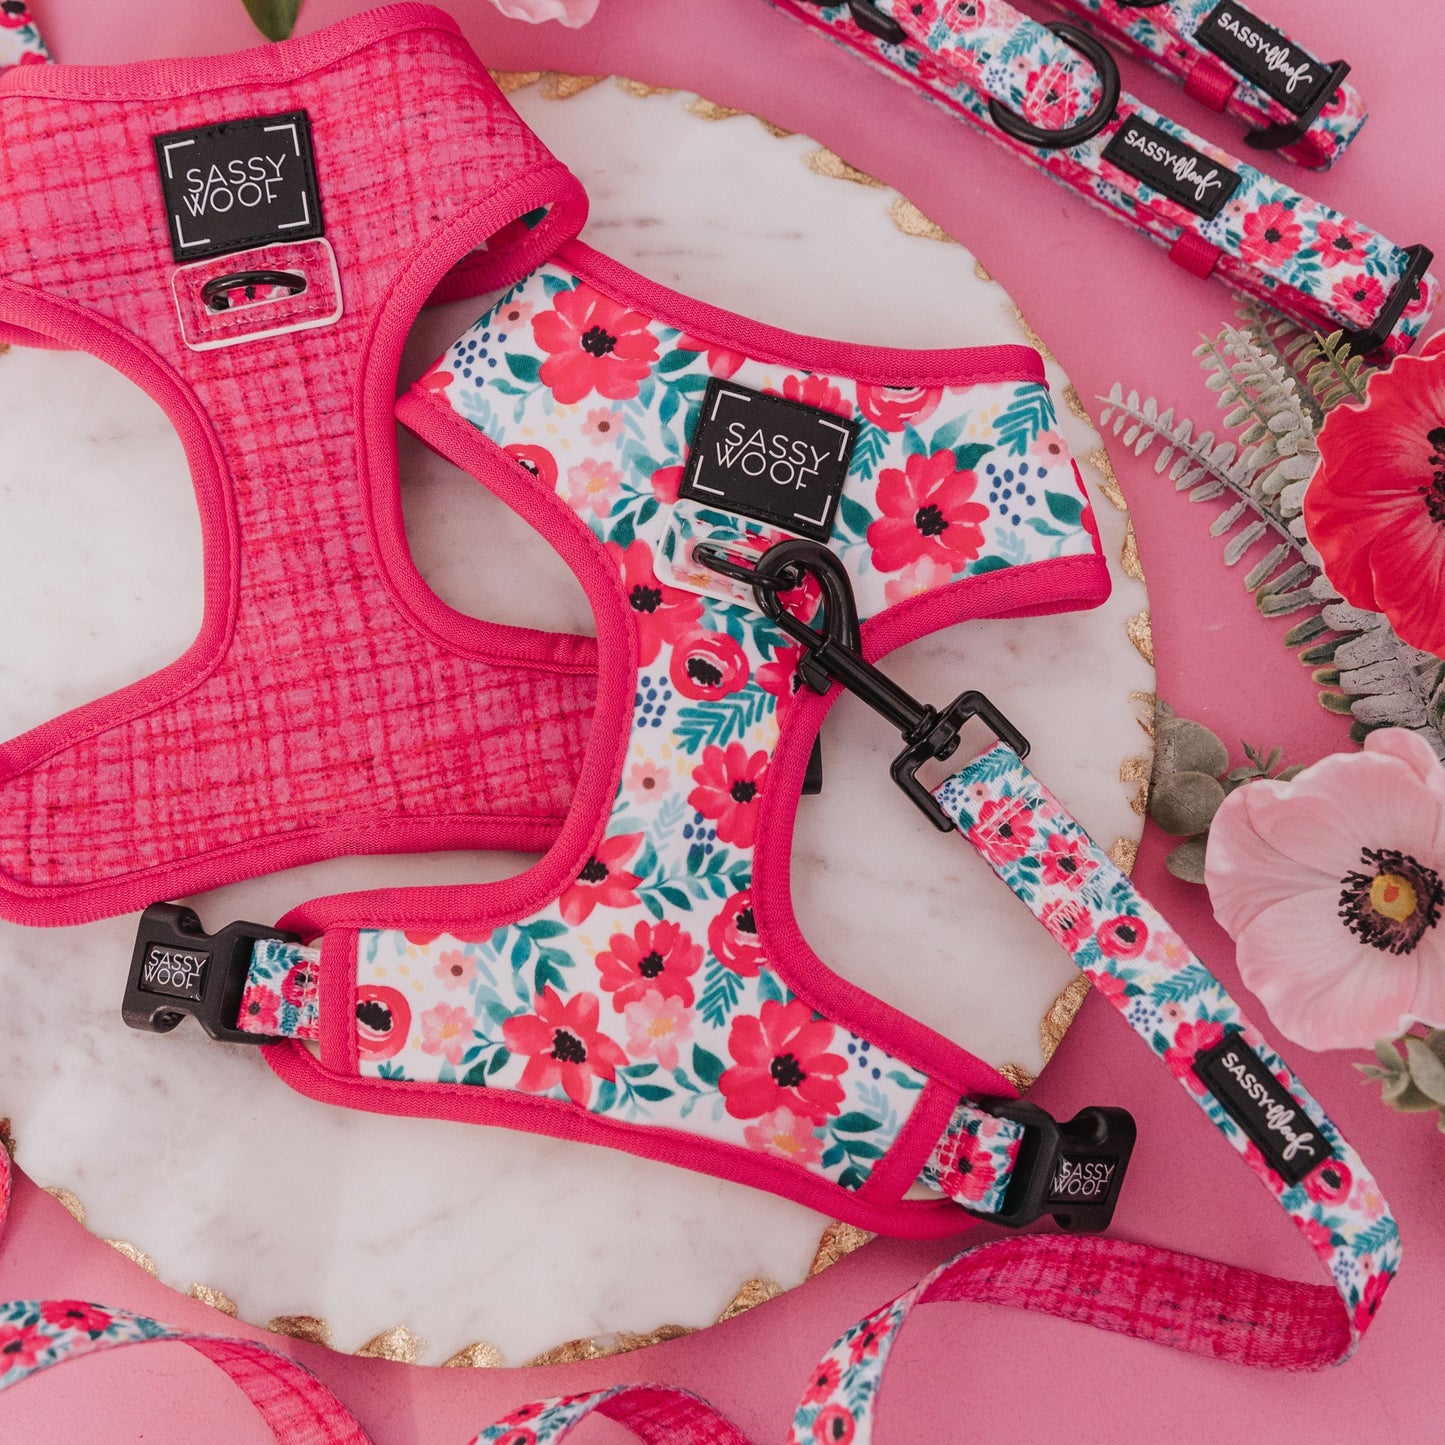 Dog Reversible Harness - Floral Frenzy